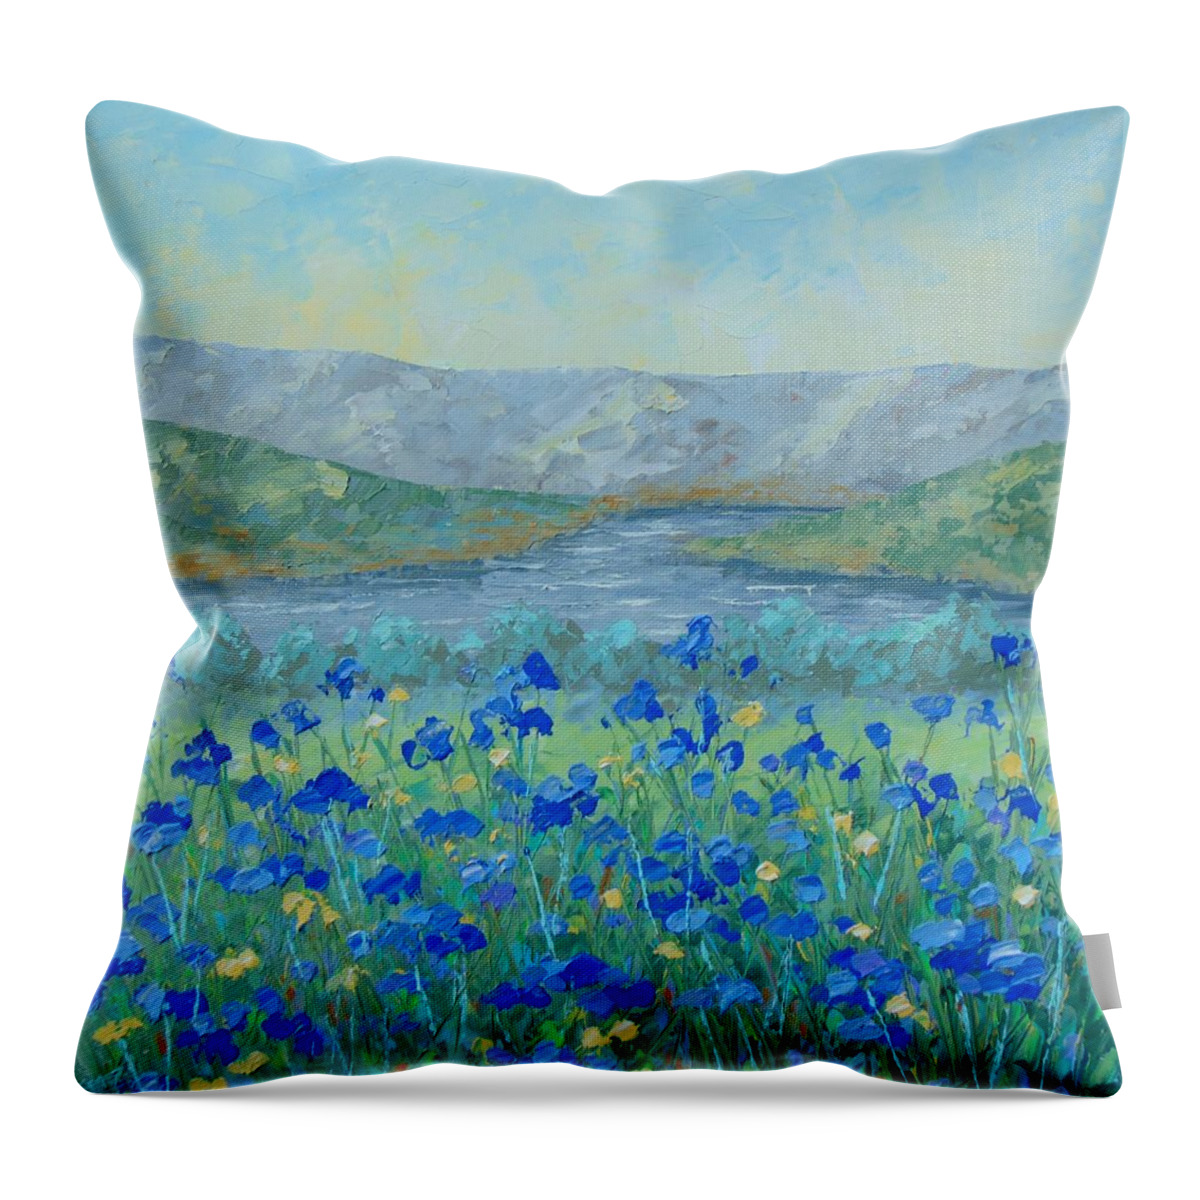 Provence Throw Pillow featuring the painting Les Apes by Frederic Payet